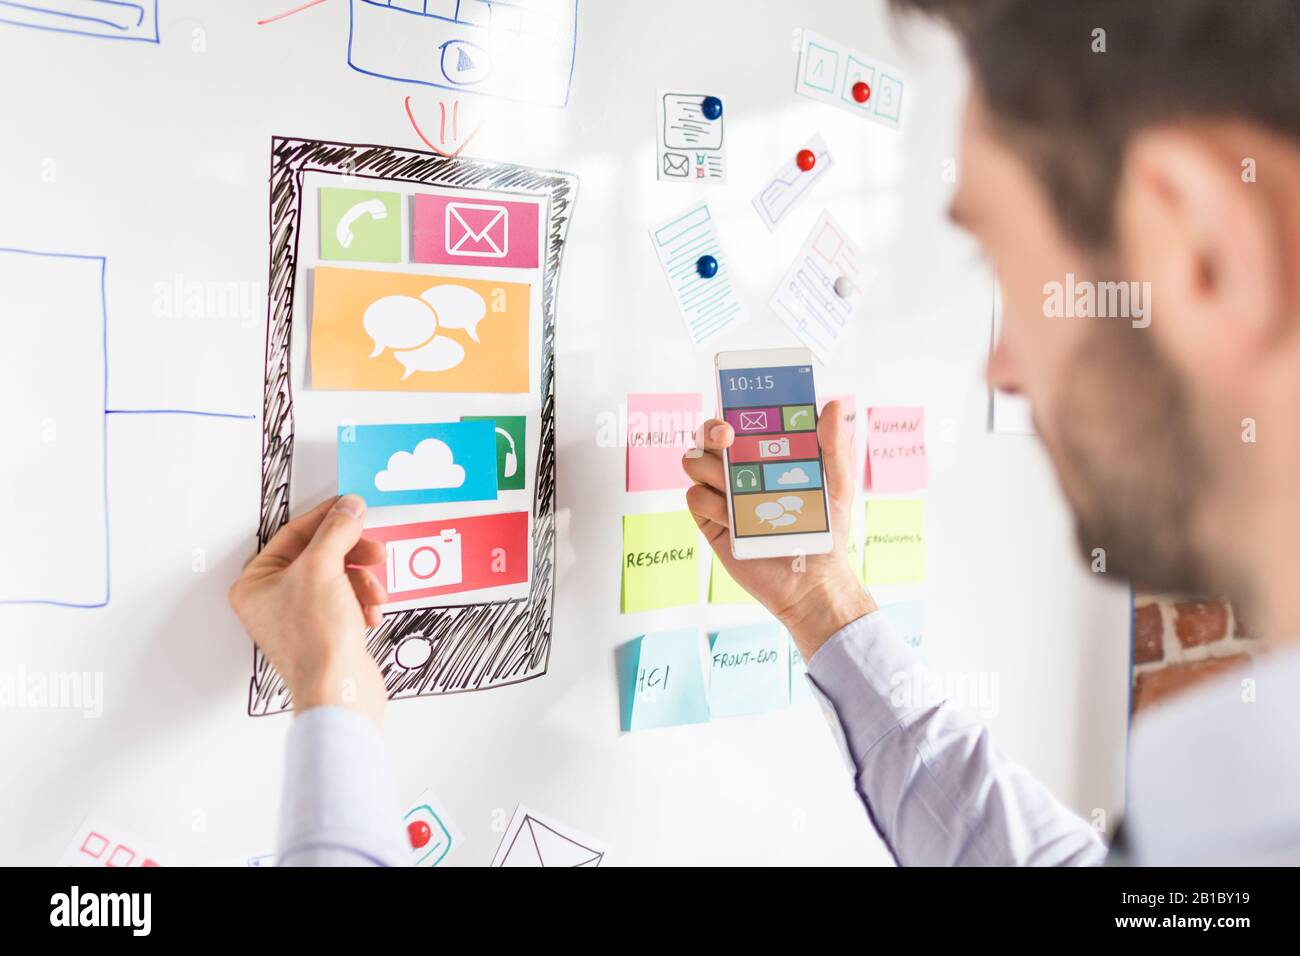 Designer man drawing website ux app development and holding smart phone on hand. User experience concept. Stock Photo